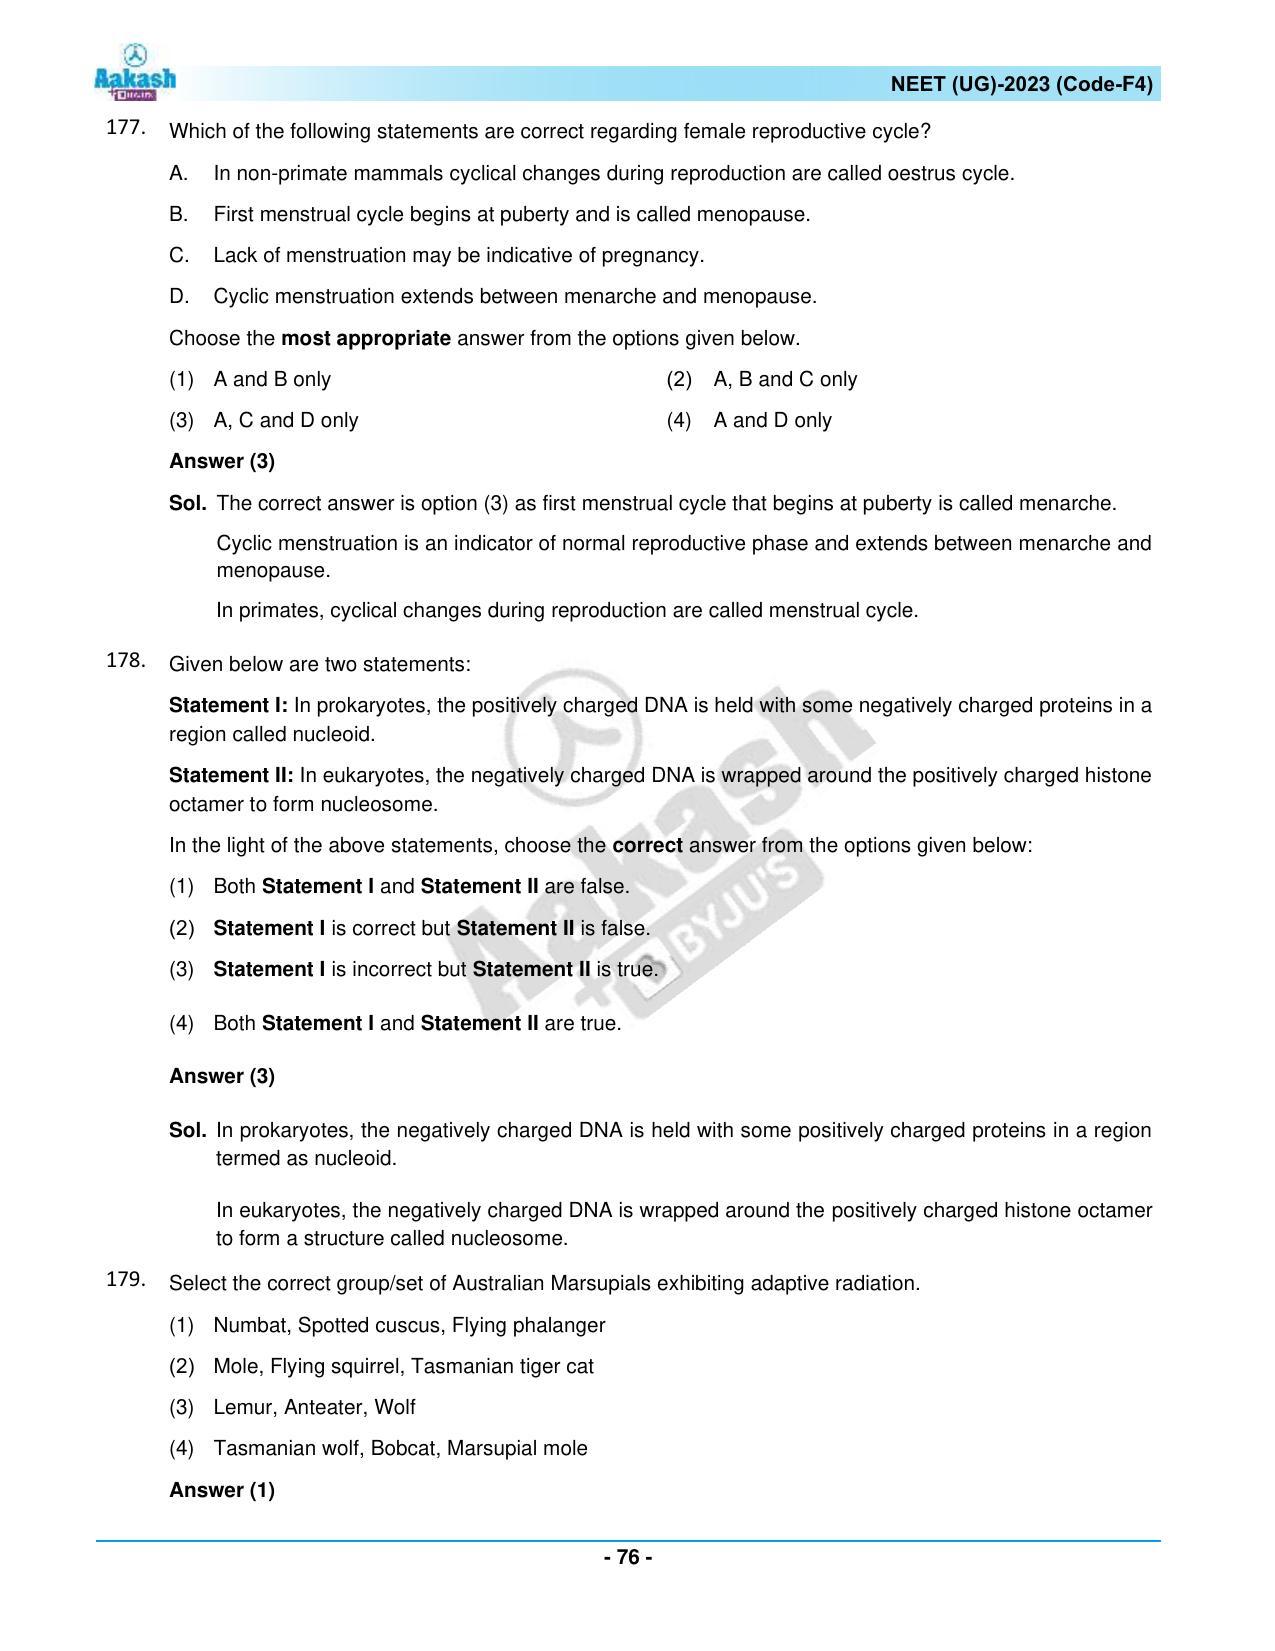 NEET 2023 Question Paper F4 - Page 76